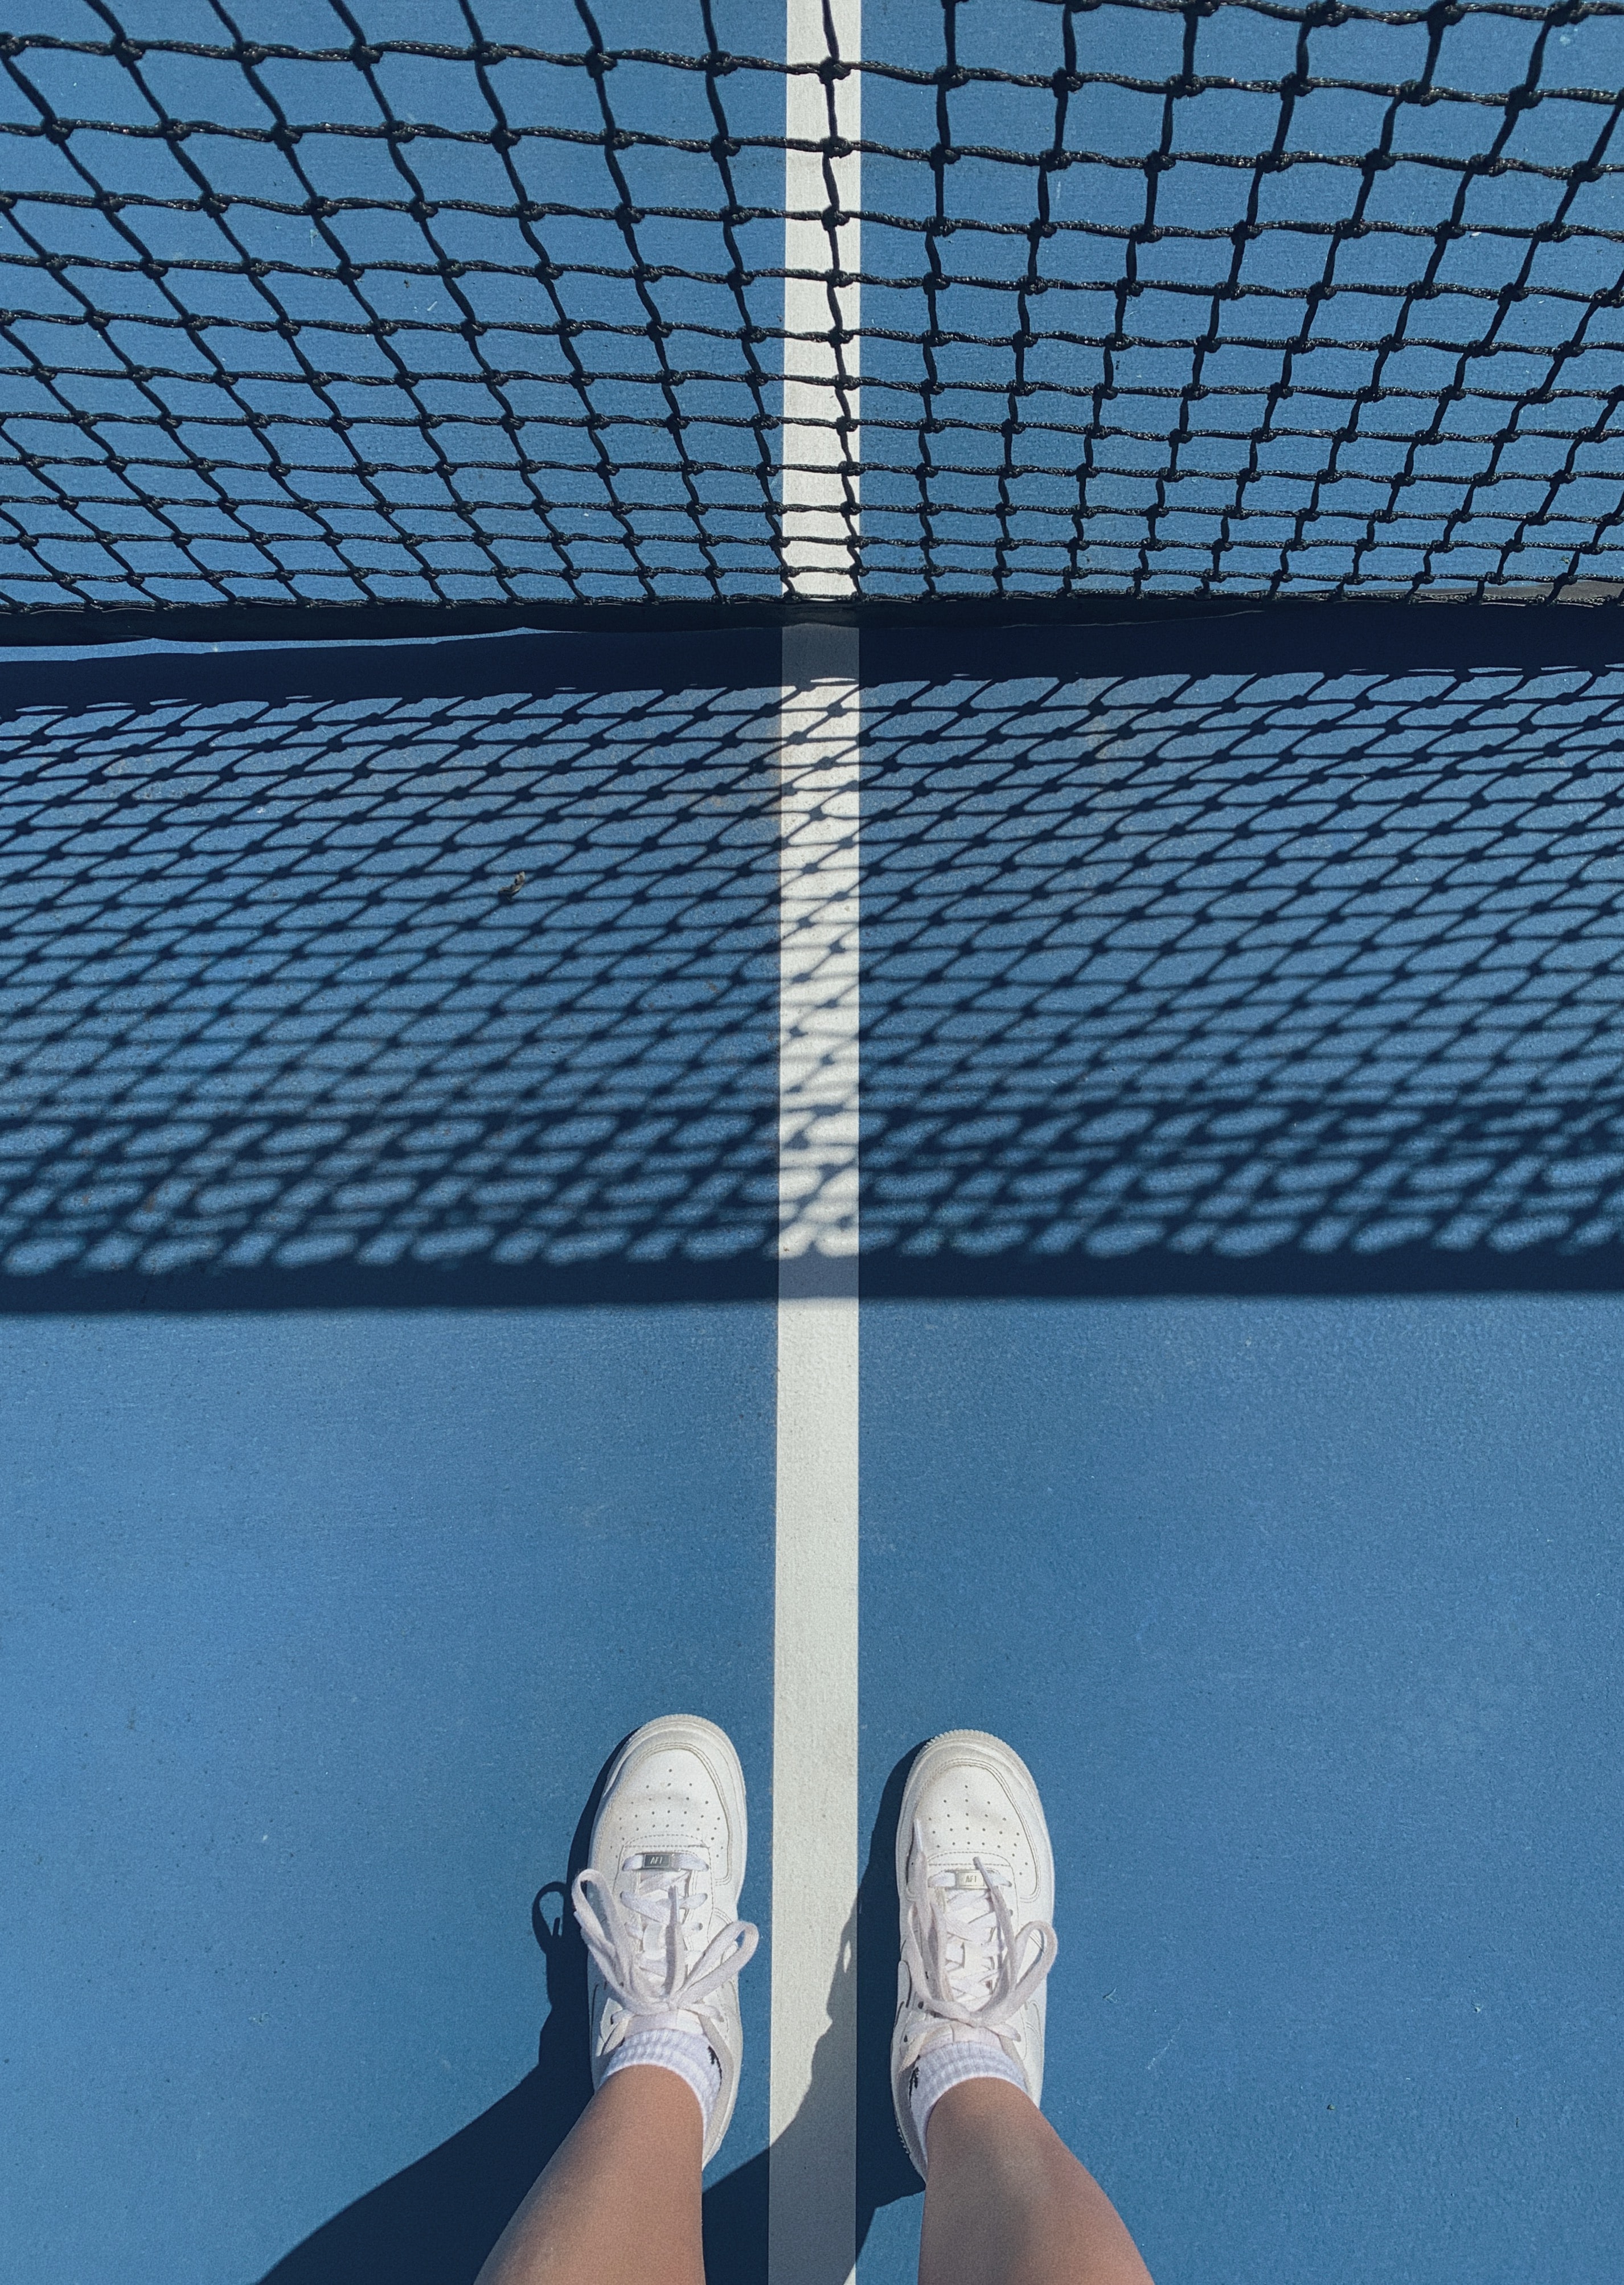 miscellaneous, sneakers, grid, tennis court Horizontal Wallpapers